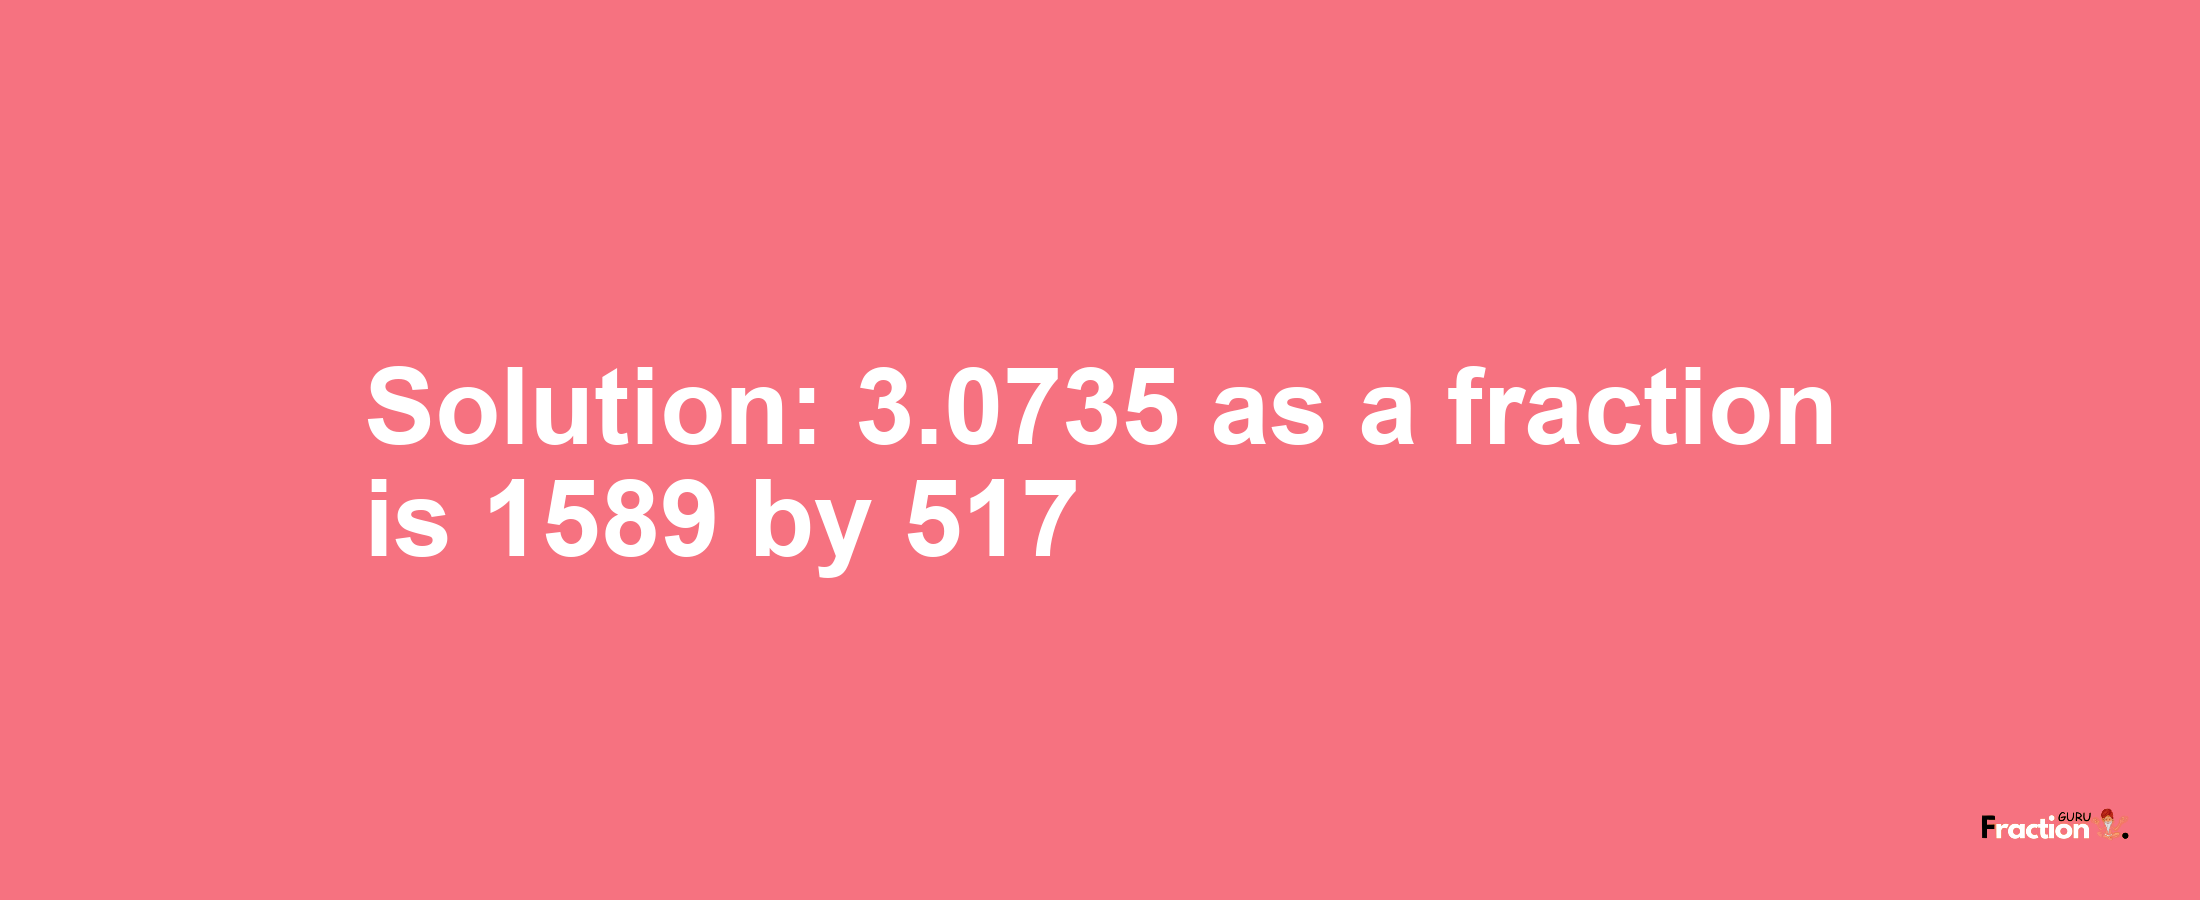 Solution:3.0735 as a fraction is 1589/517